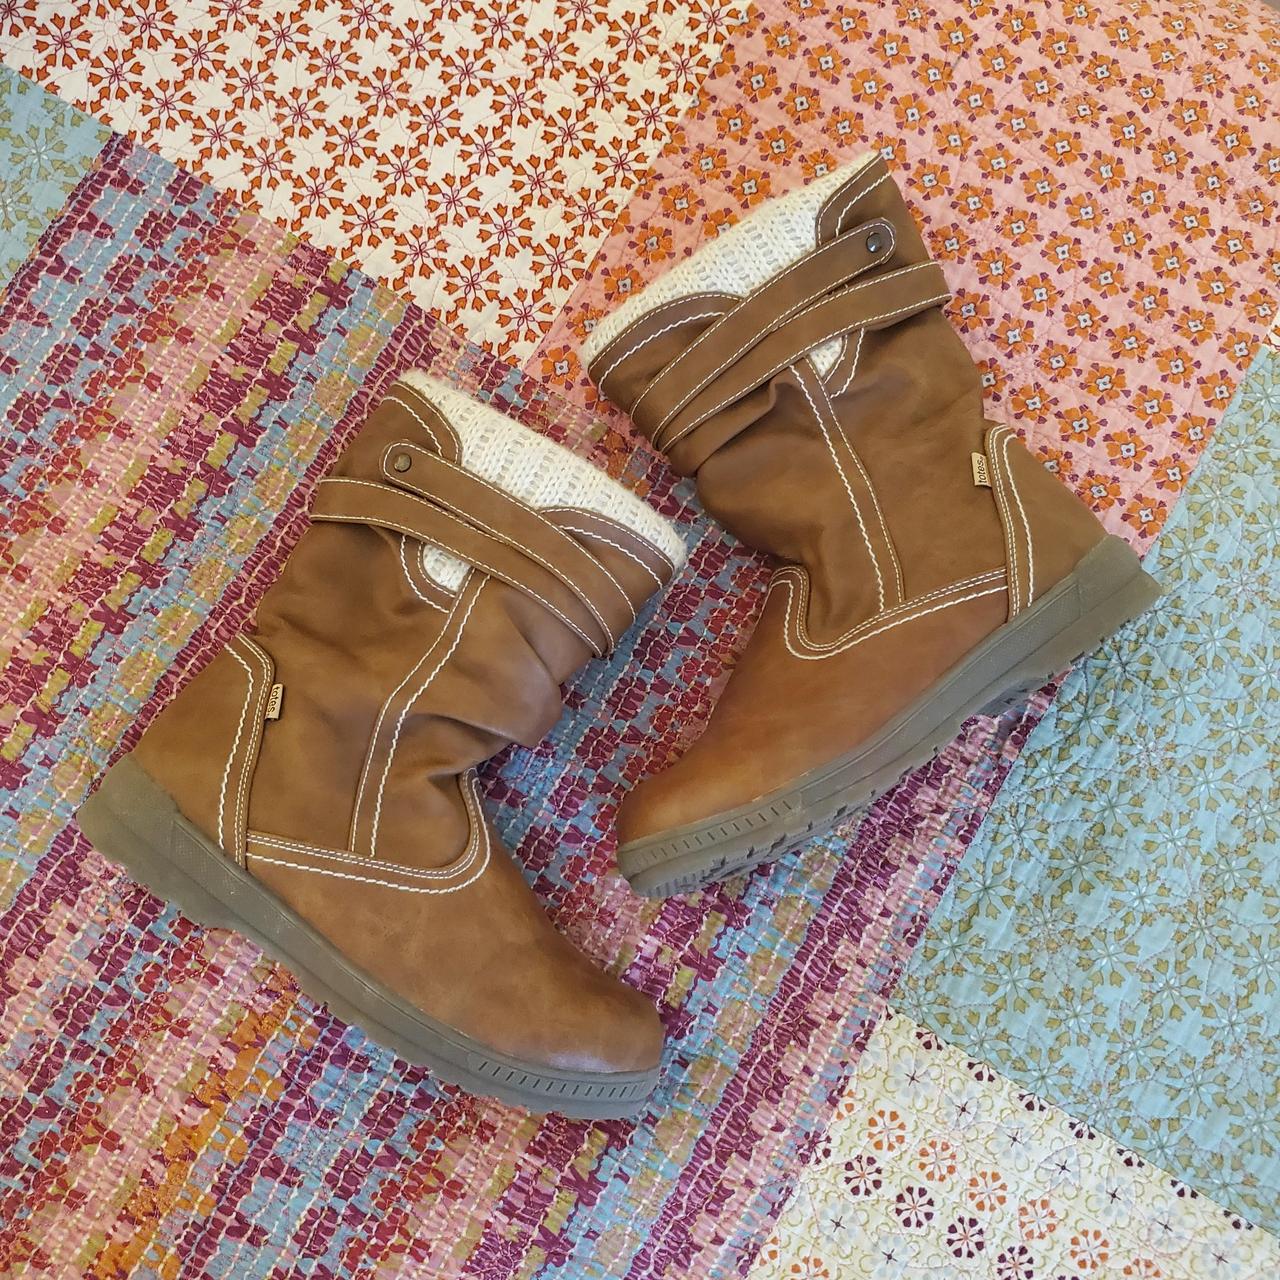 Worn - - 2-3 Booties🍂 Depop 🍂Totes times - Proof Size... Water